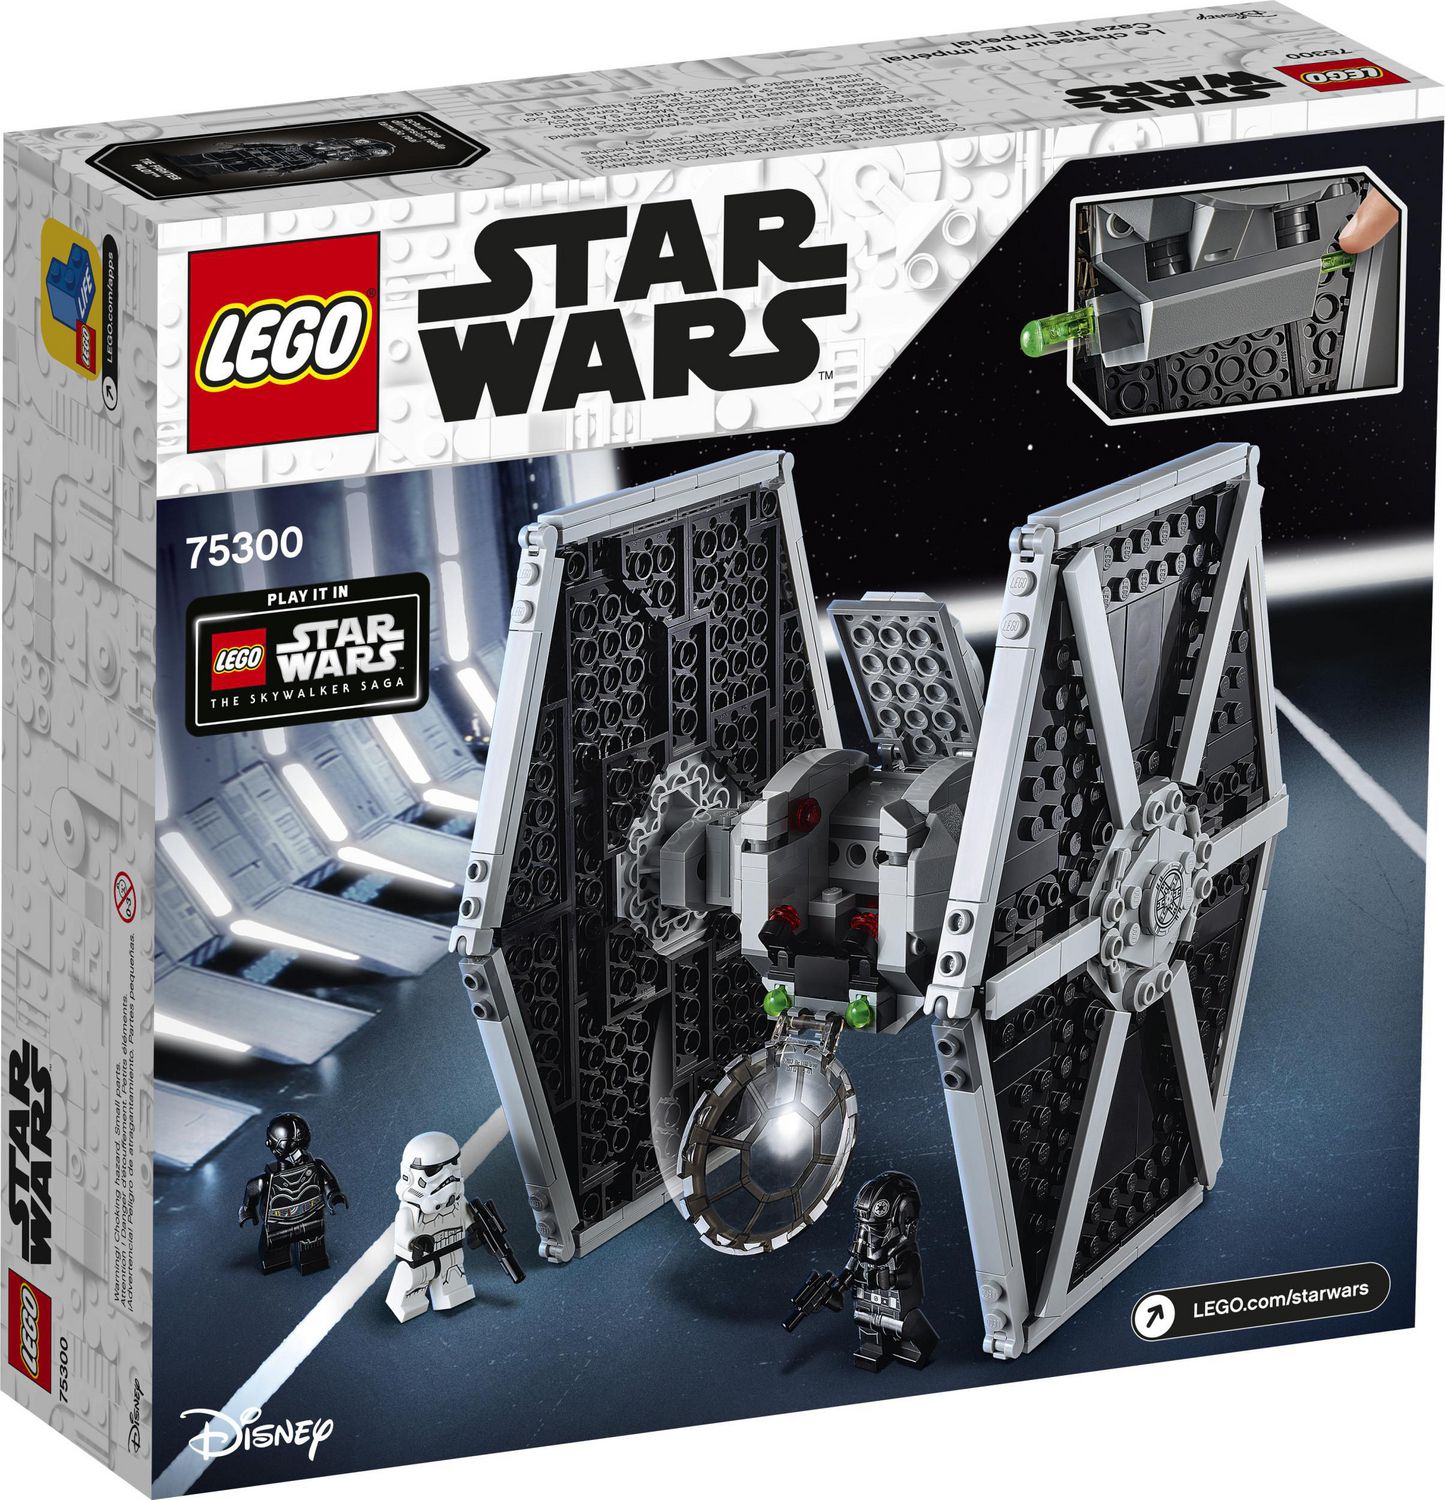 for sale online LEGO Star Wars Imperial TIE Fighter 75300 Building Kit 432 Pieces